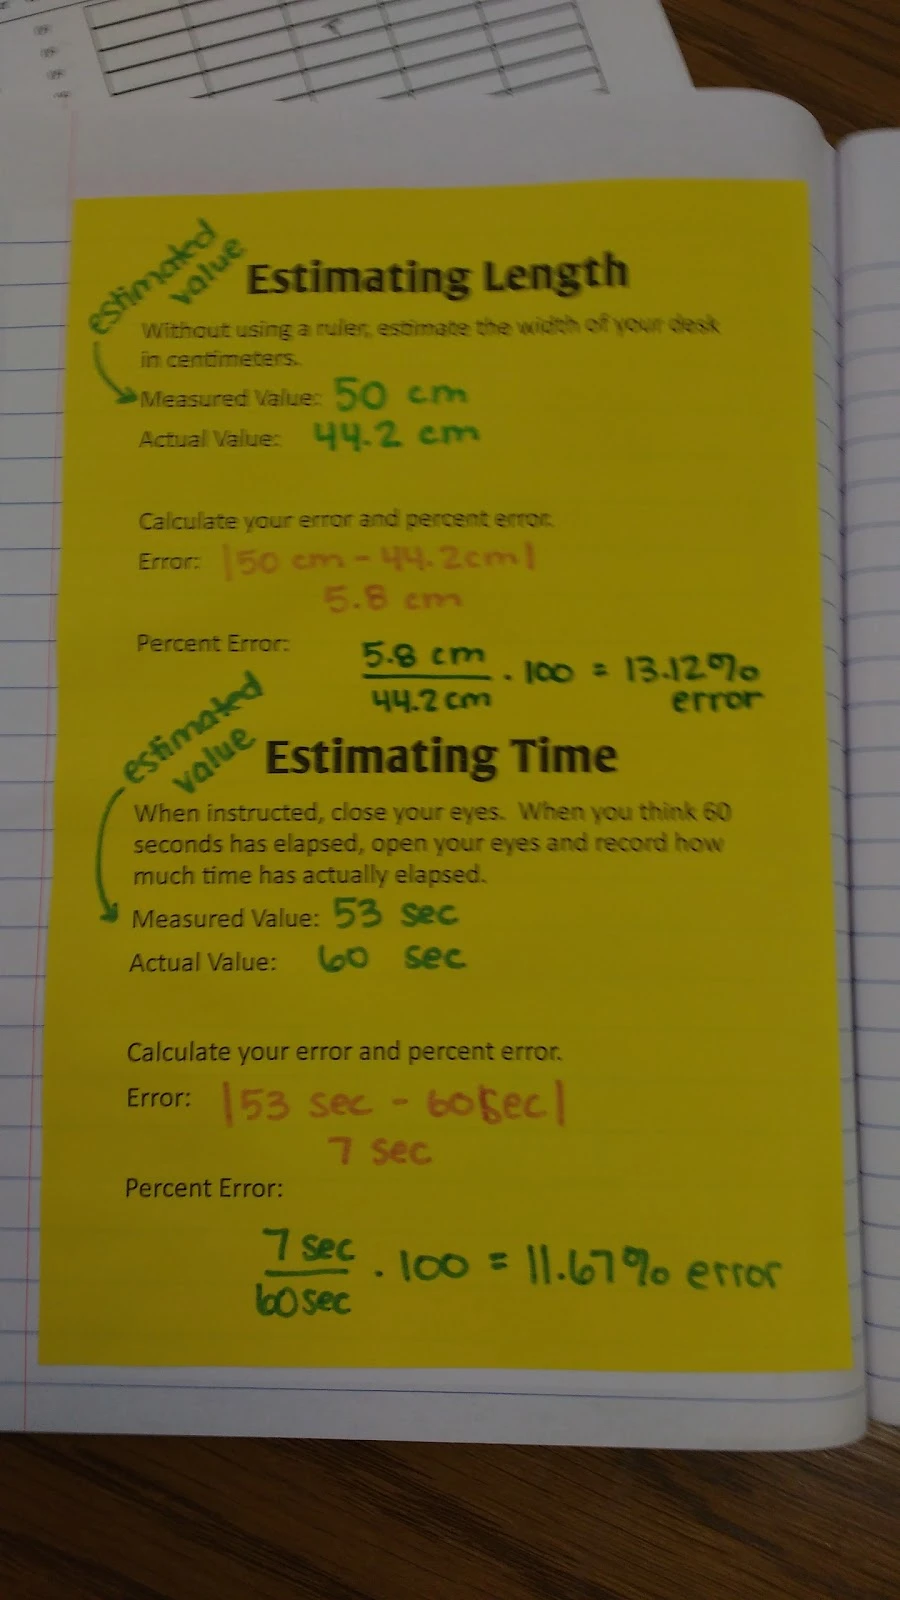 estimating length and estimating time mini labs for calculating error and percent error. 